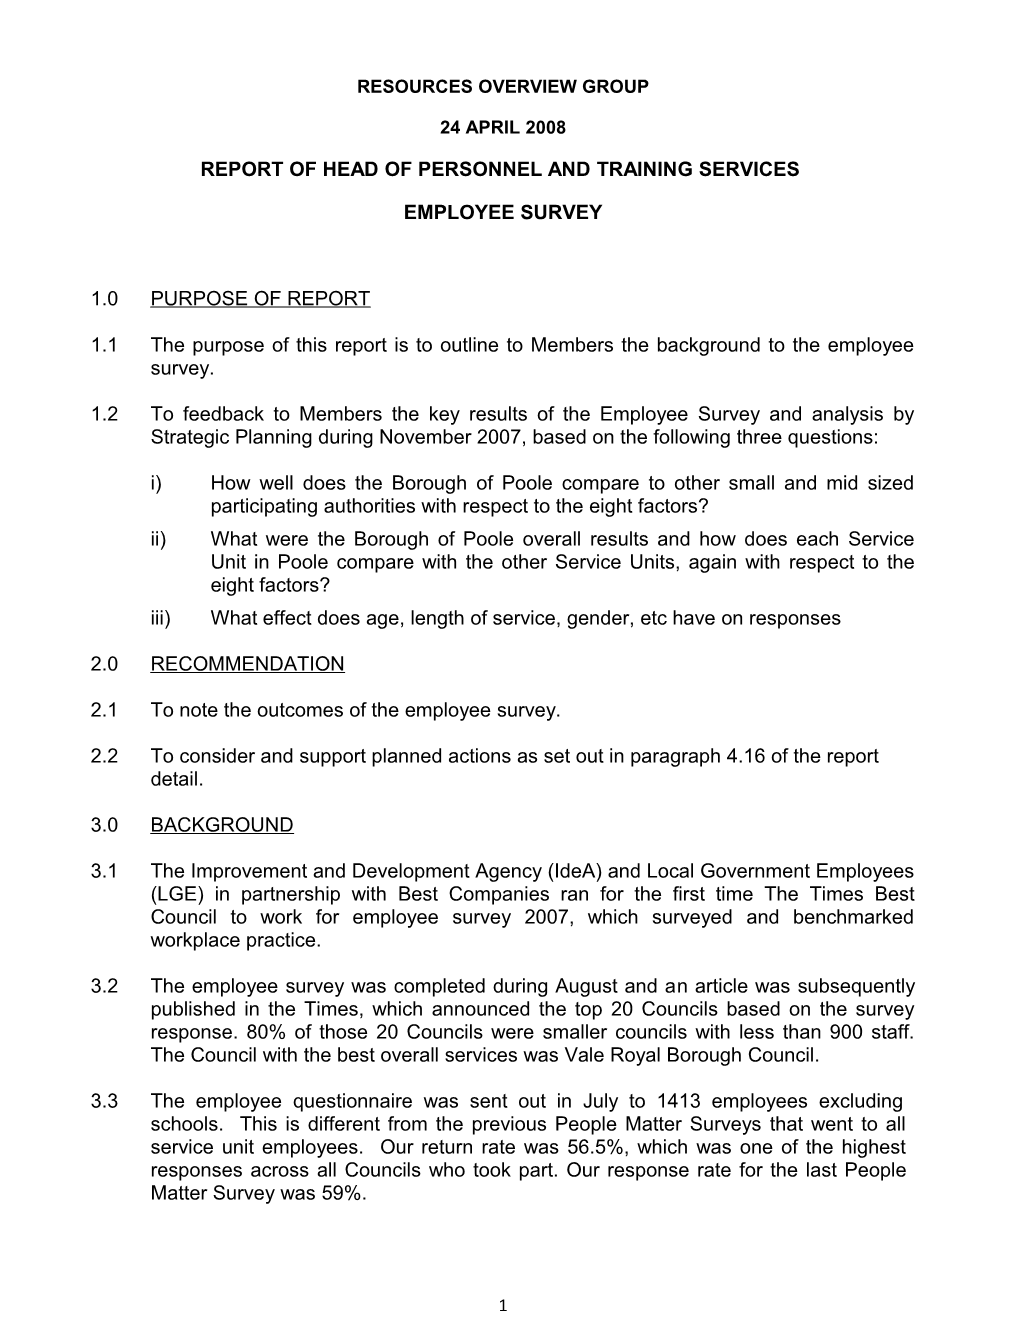 Report of Head of Personnel and Training Services